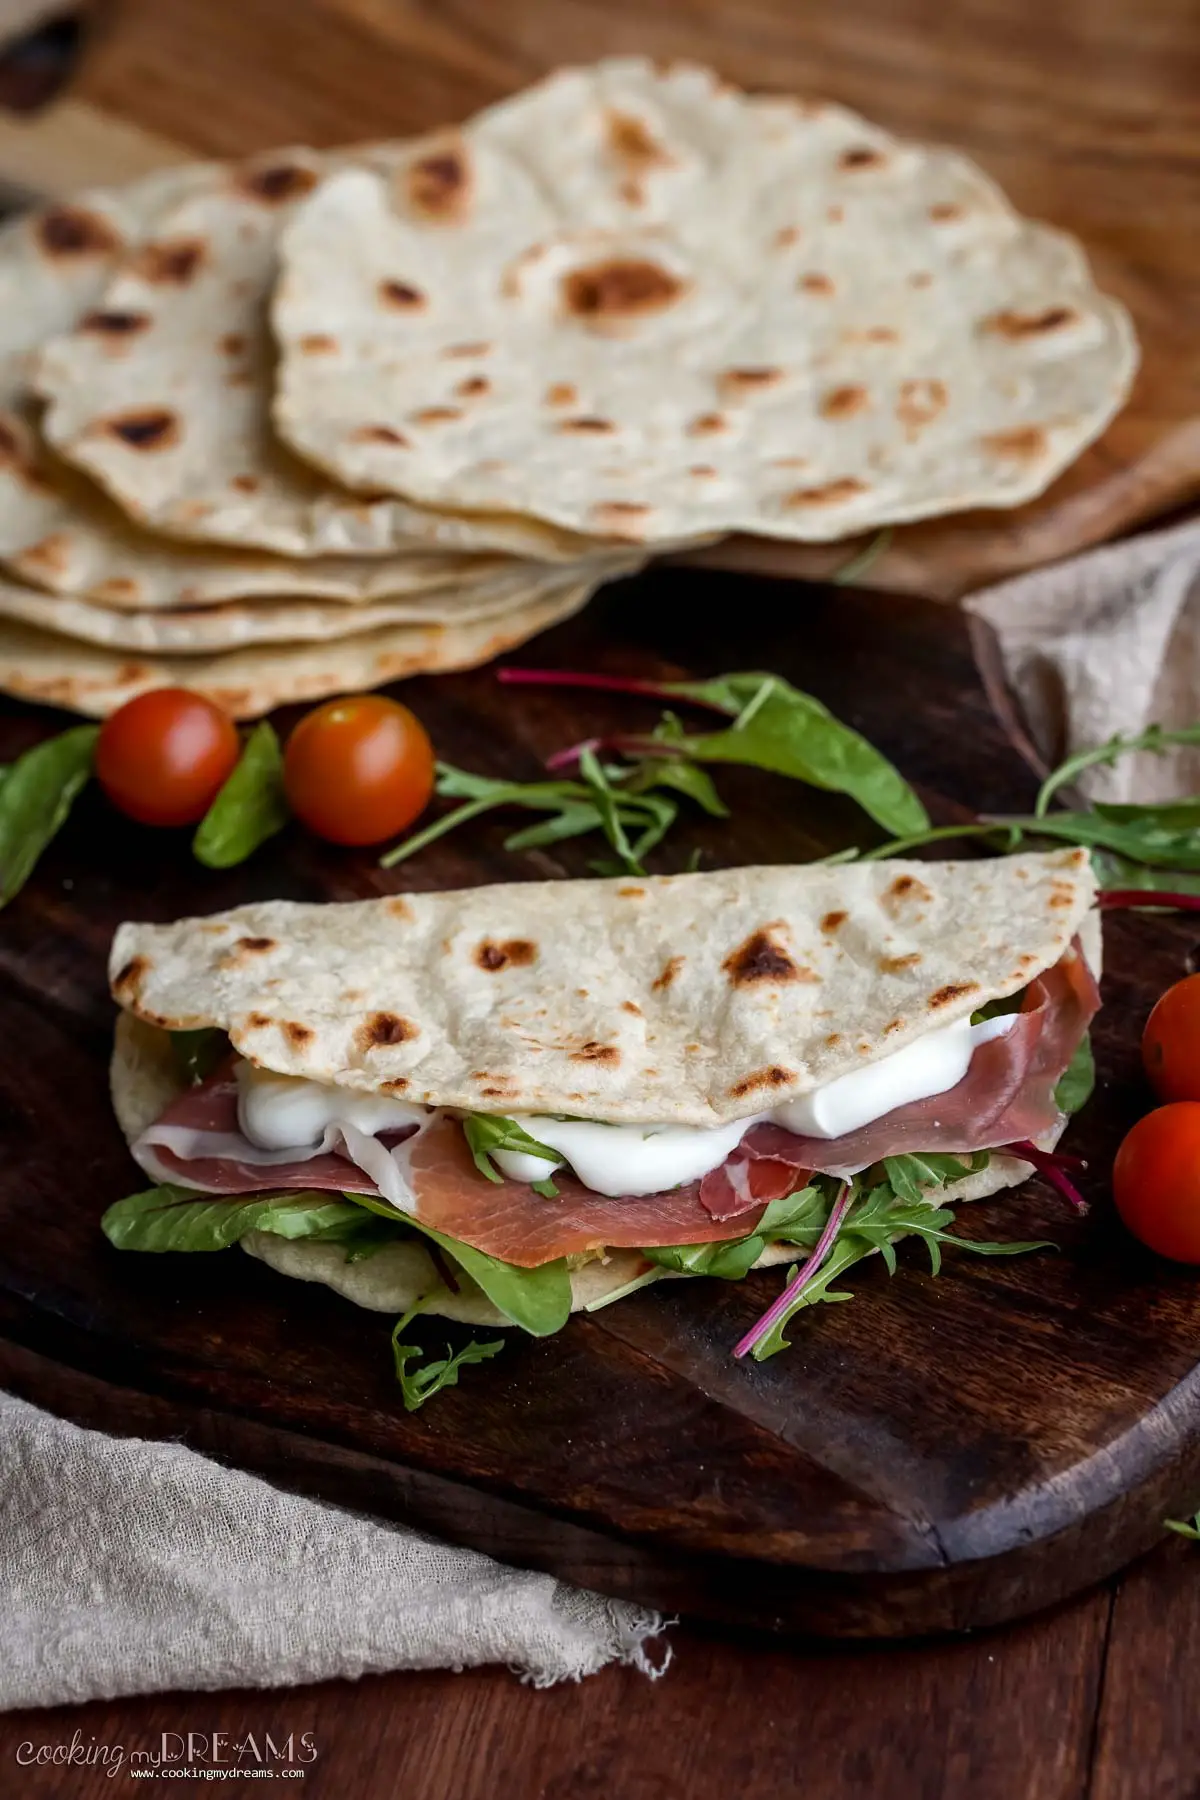 A folded piadina filled with prosciutto and salad, on a wooden board.